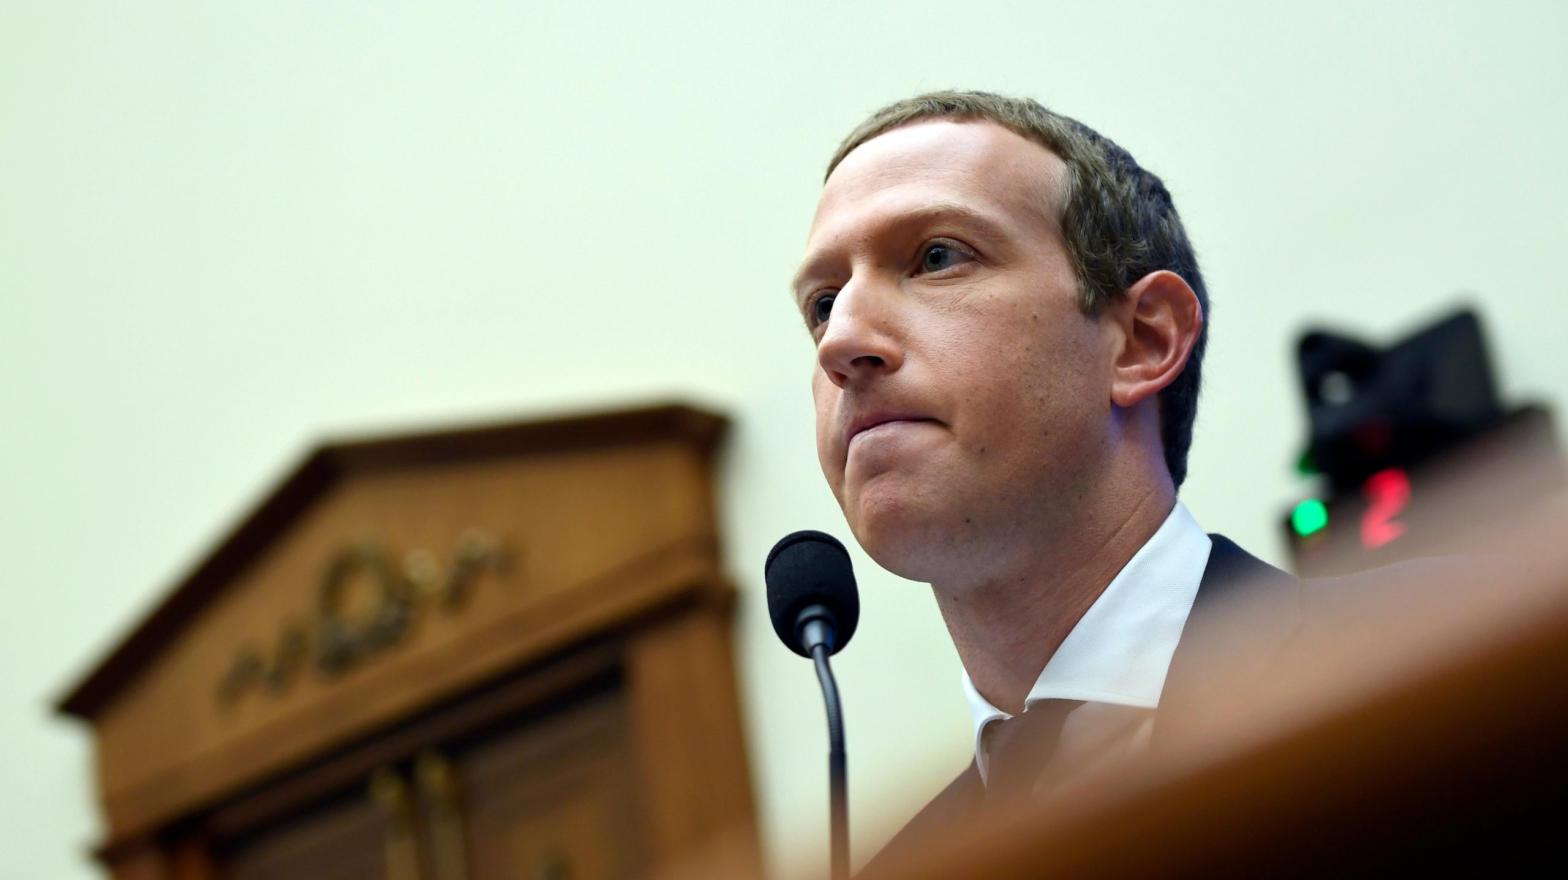 Chief Executive Officer Mark Zuckerberg testifies before the House Financial Services Committee on Capitol Hill in Washington, Oct. 23, 2019. (Photo: Susan Walsh, AP)